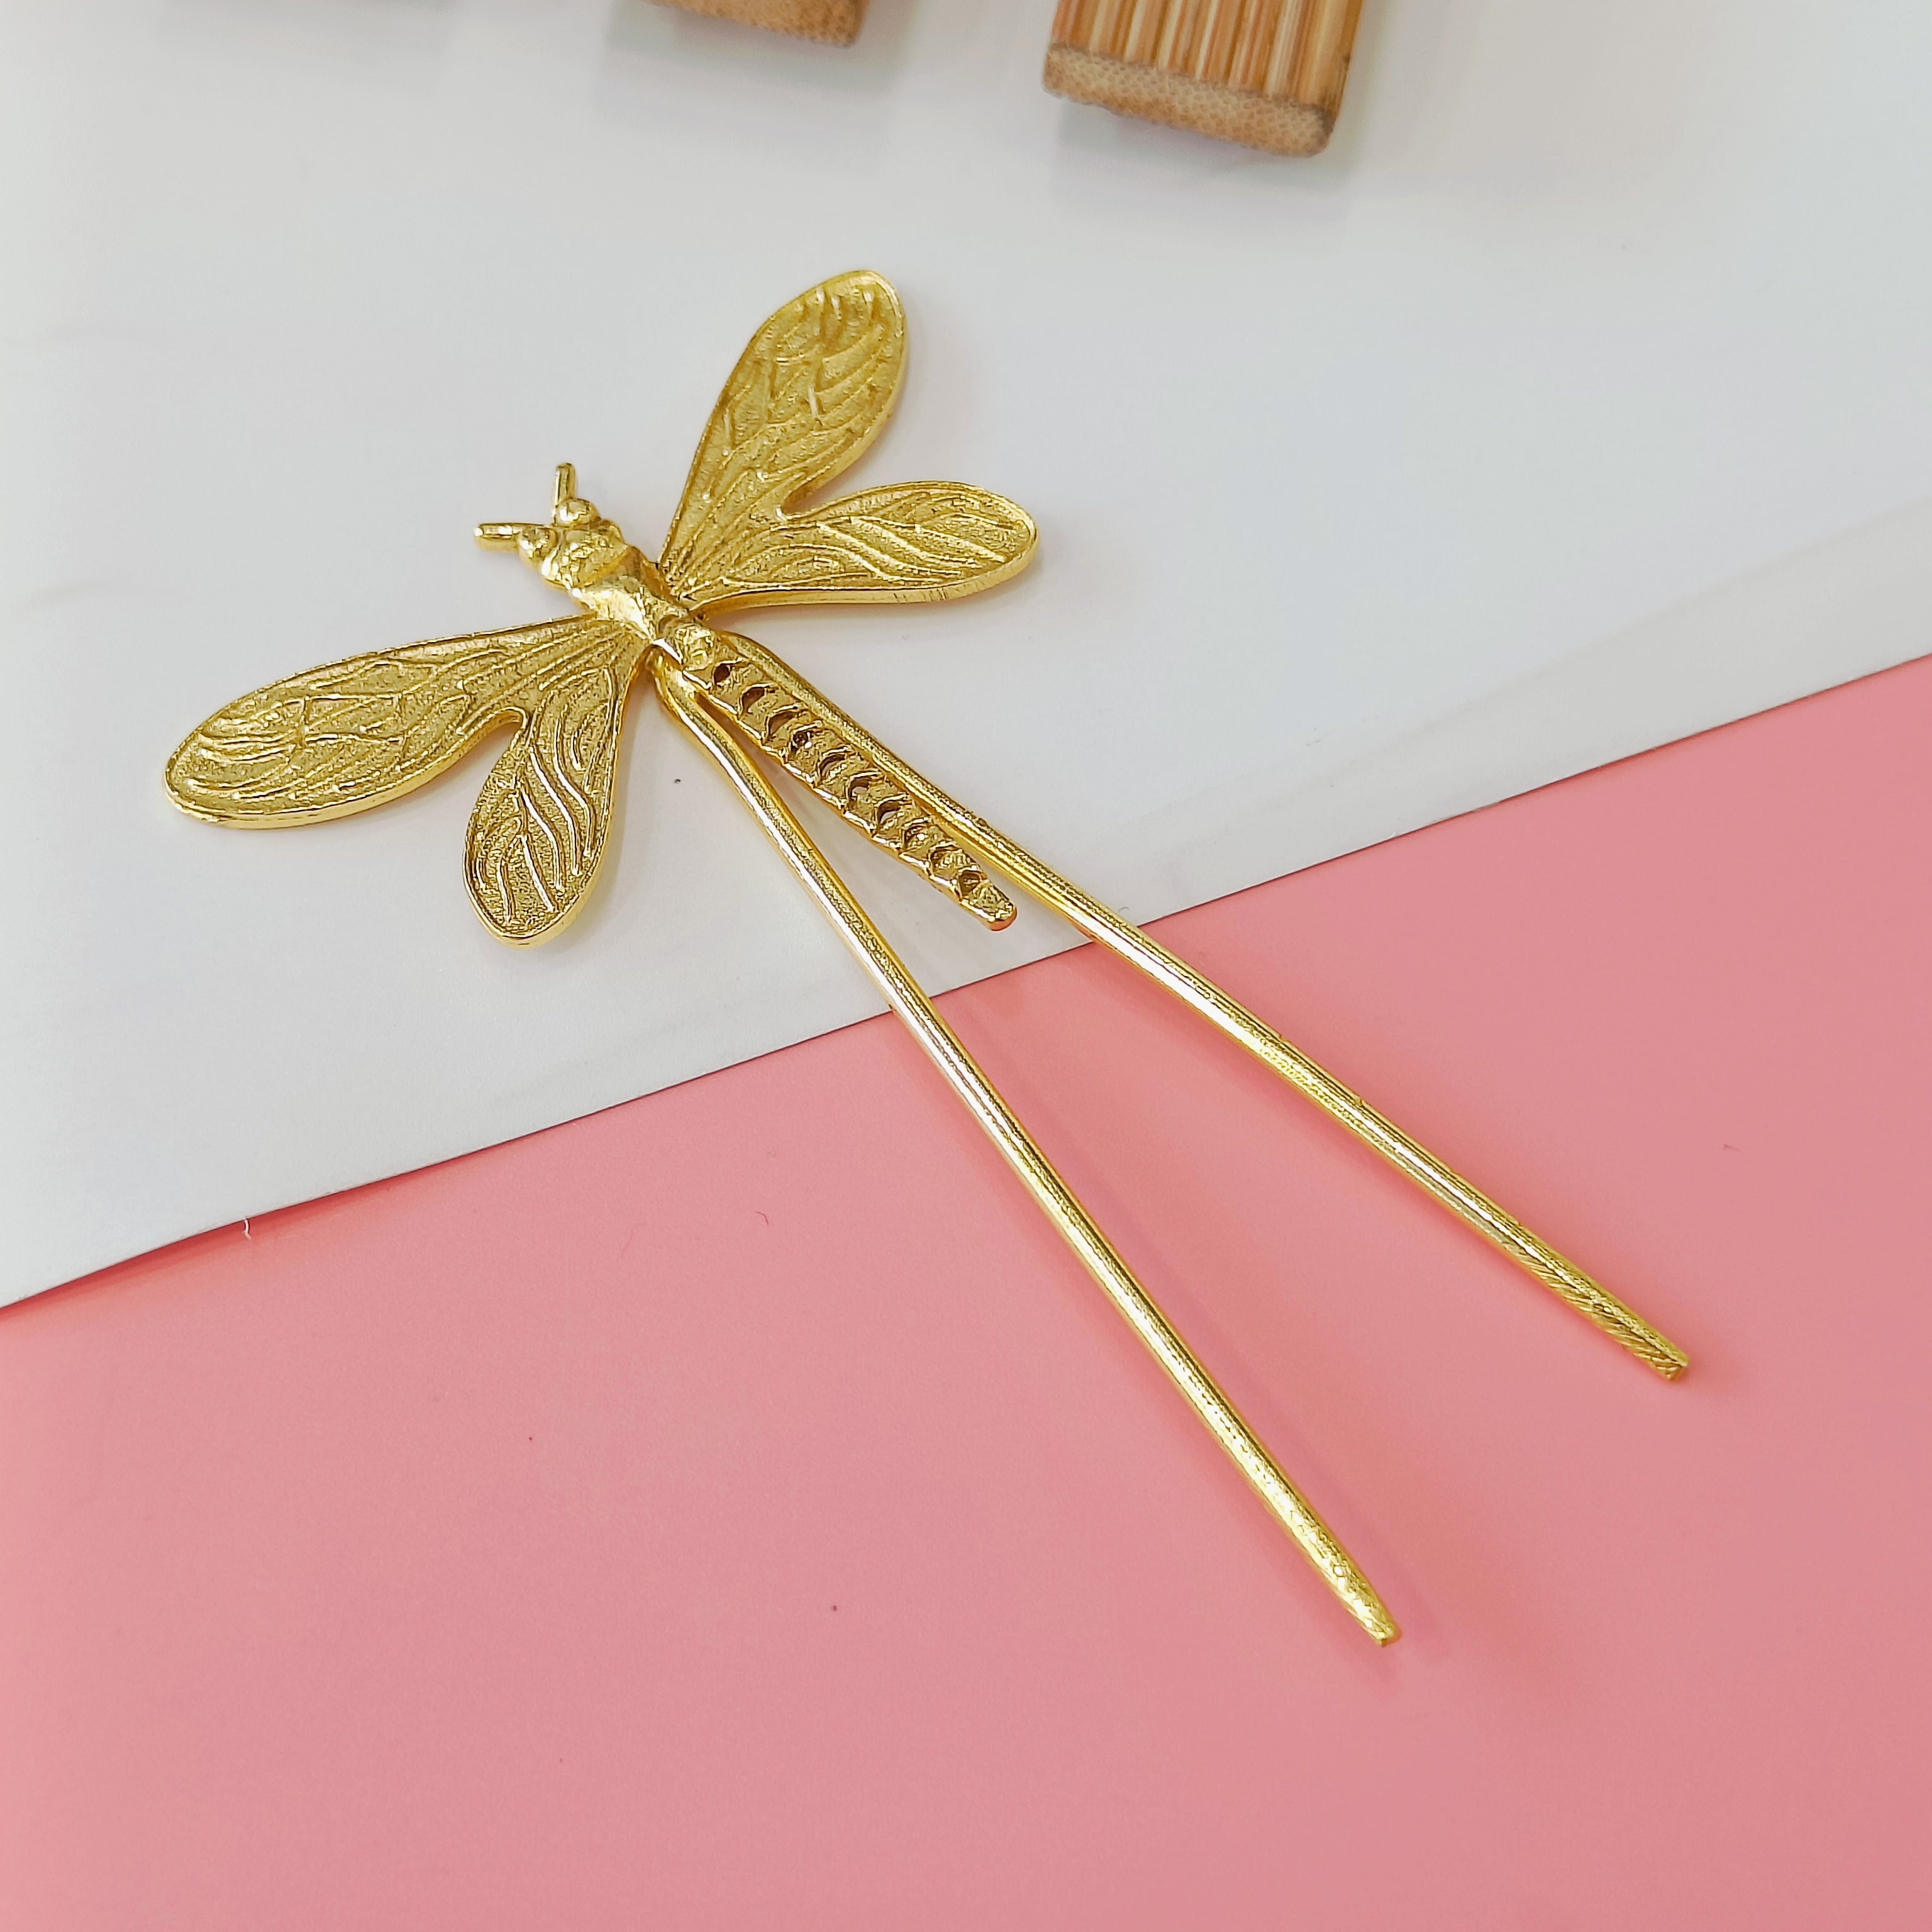 Layla Dolly earrings with Hair pin